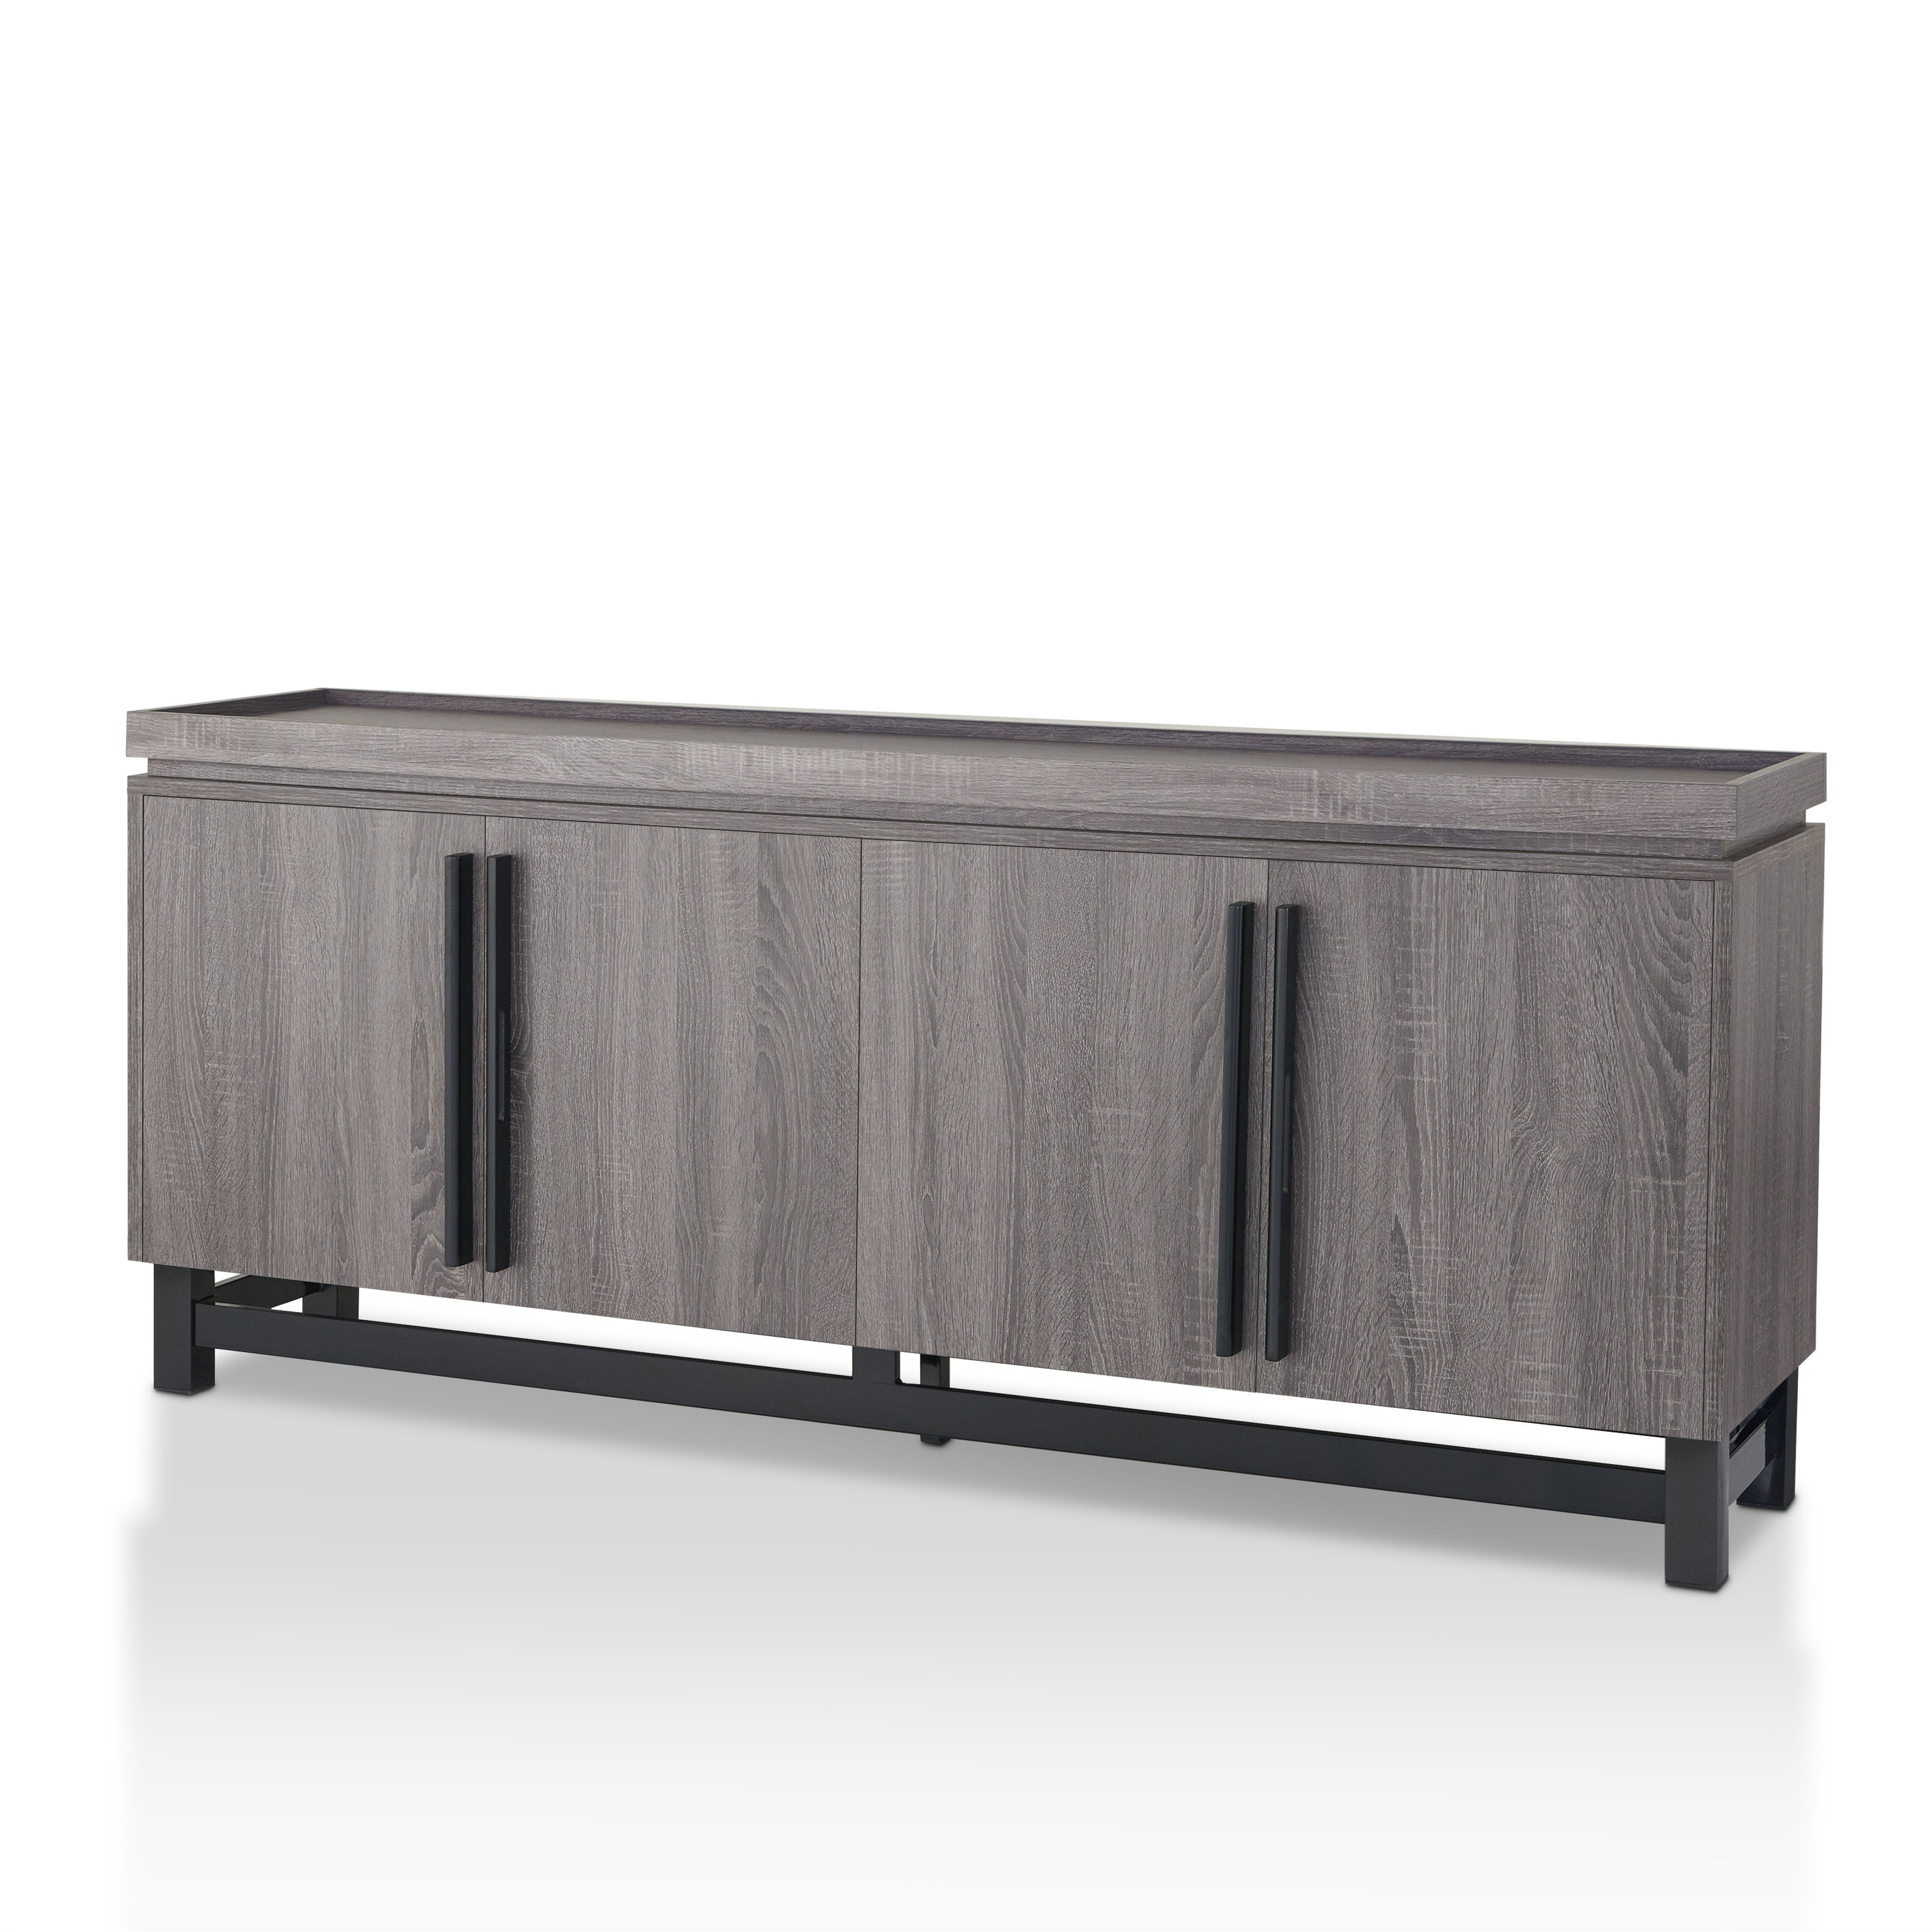 Modern & Contemporary Credenza Modern | Allmodern For Most Recent Lainey Credenzas (View 17 of 20)